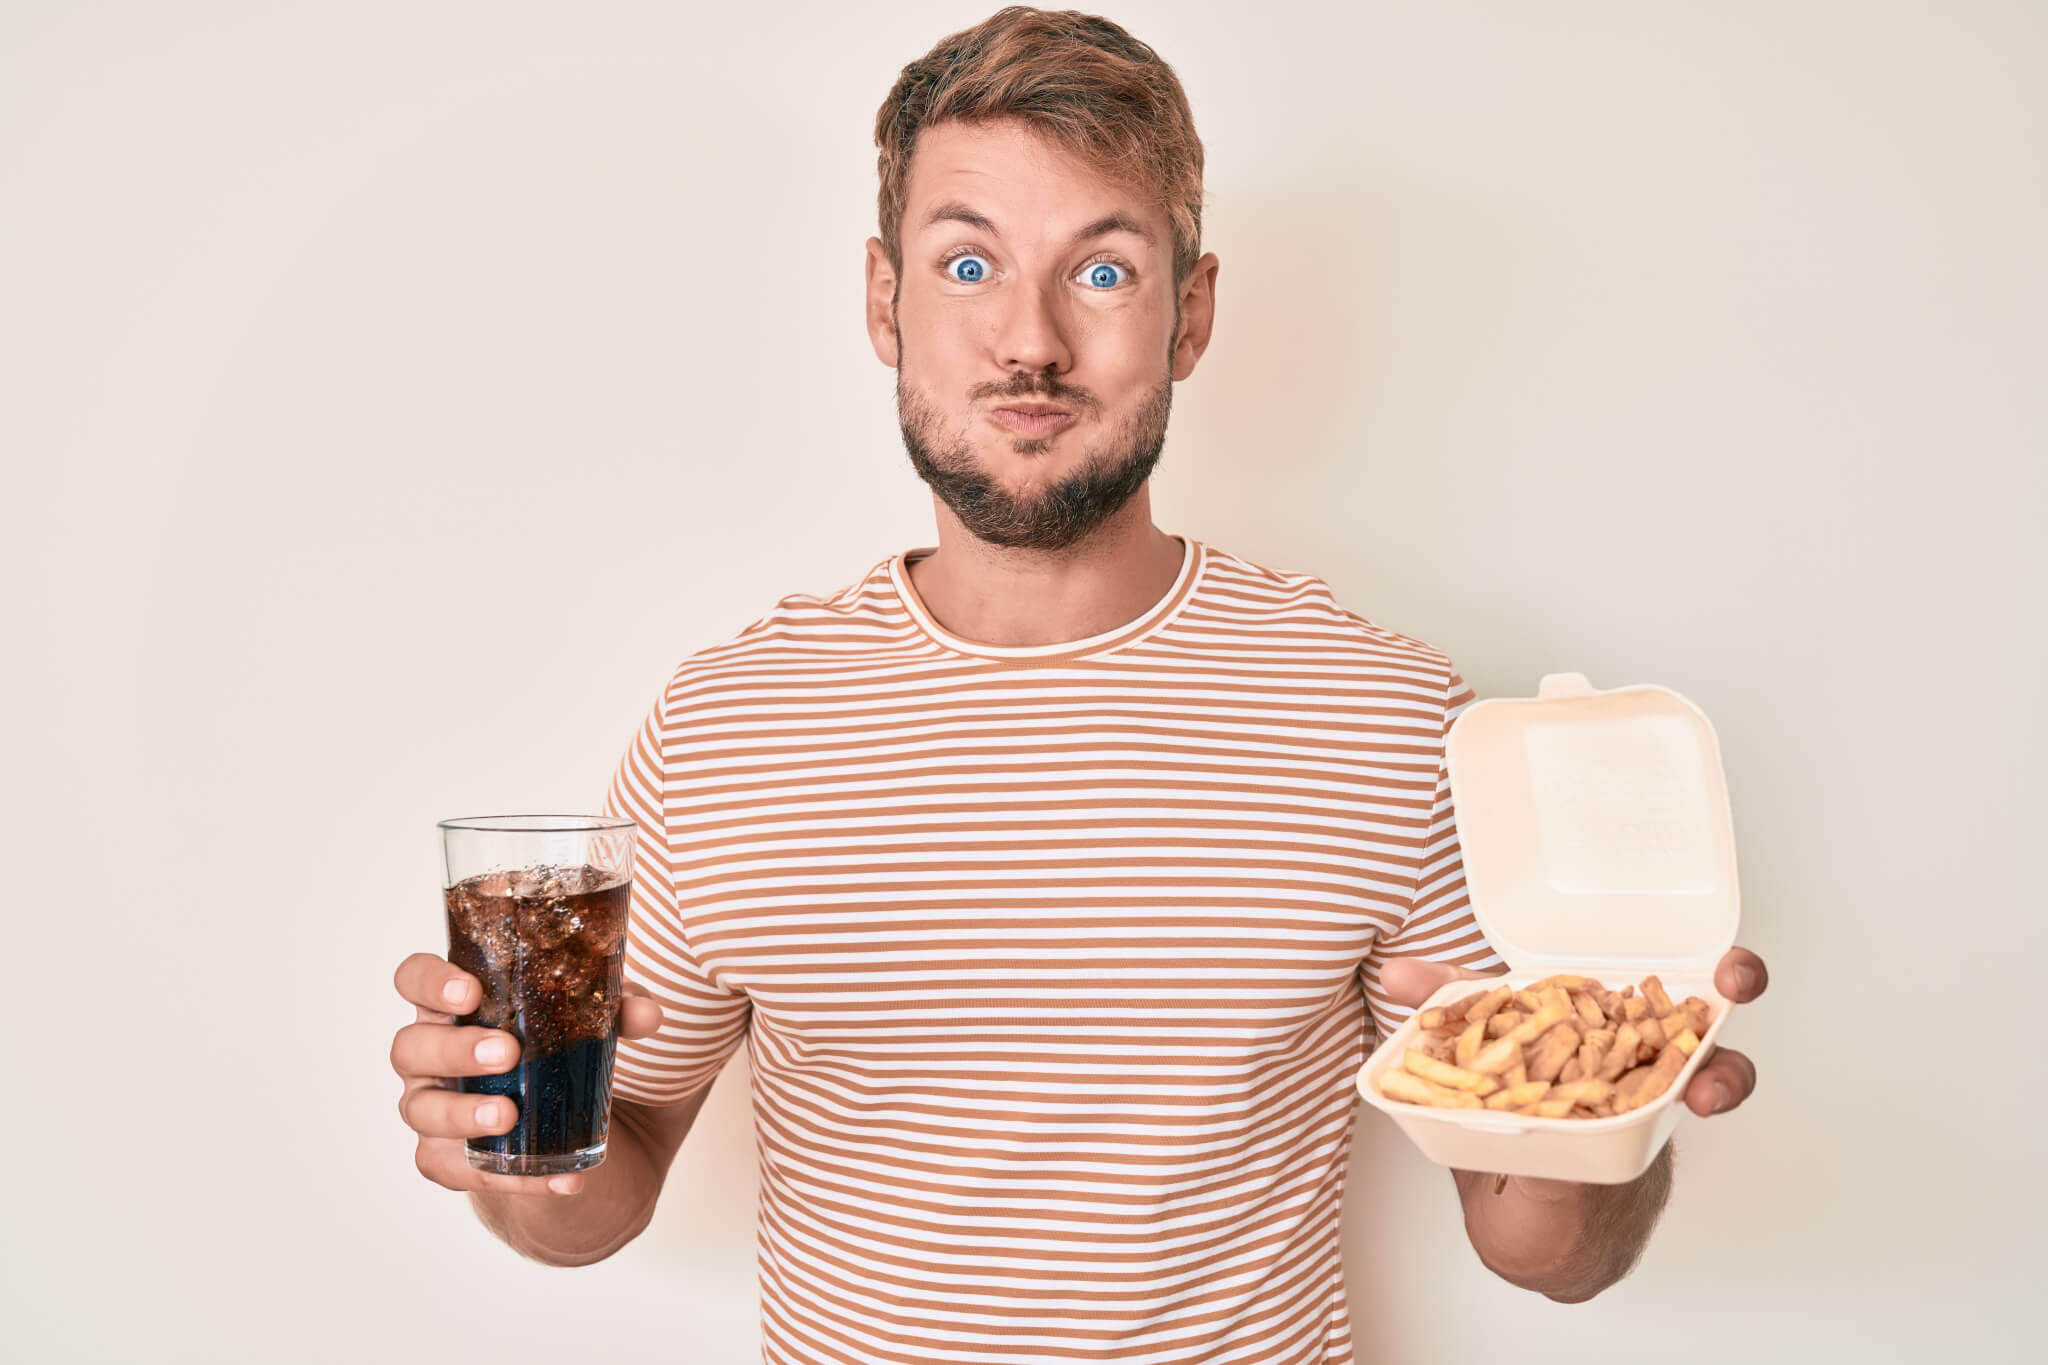 Young man mouth full of food holding soda